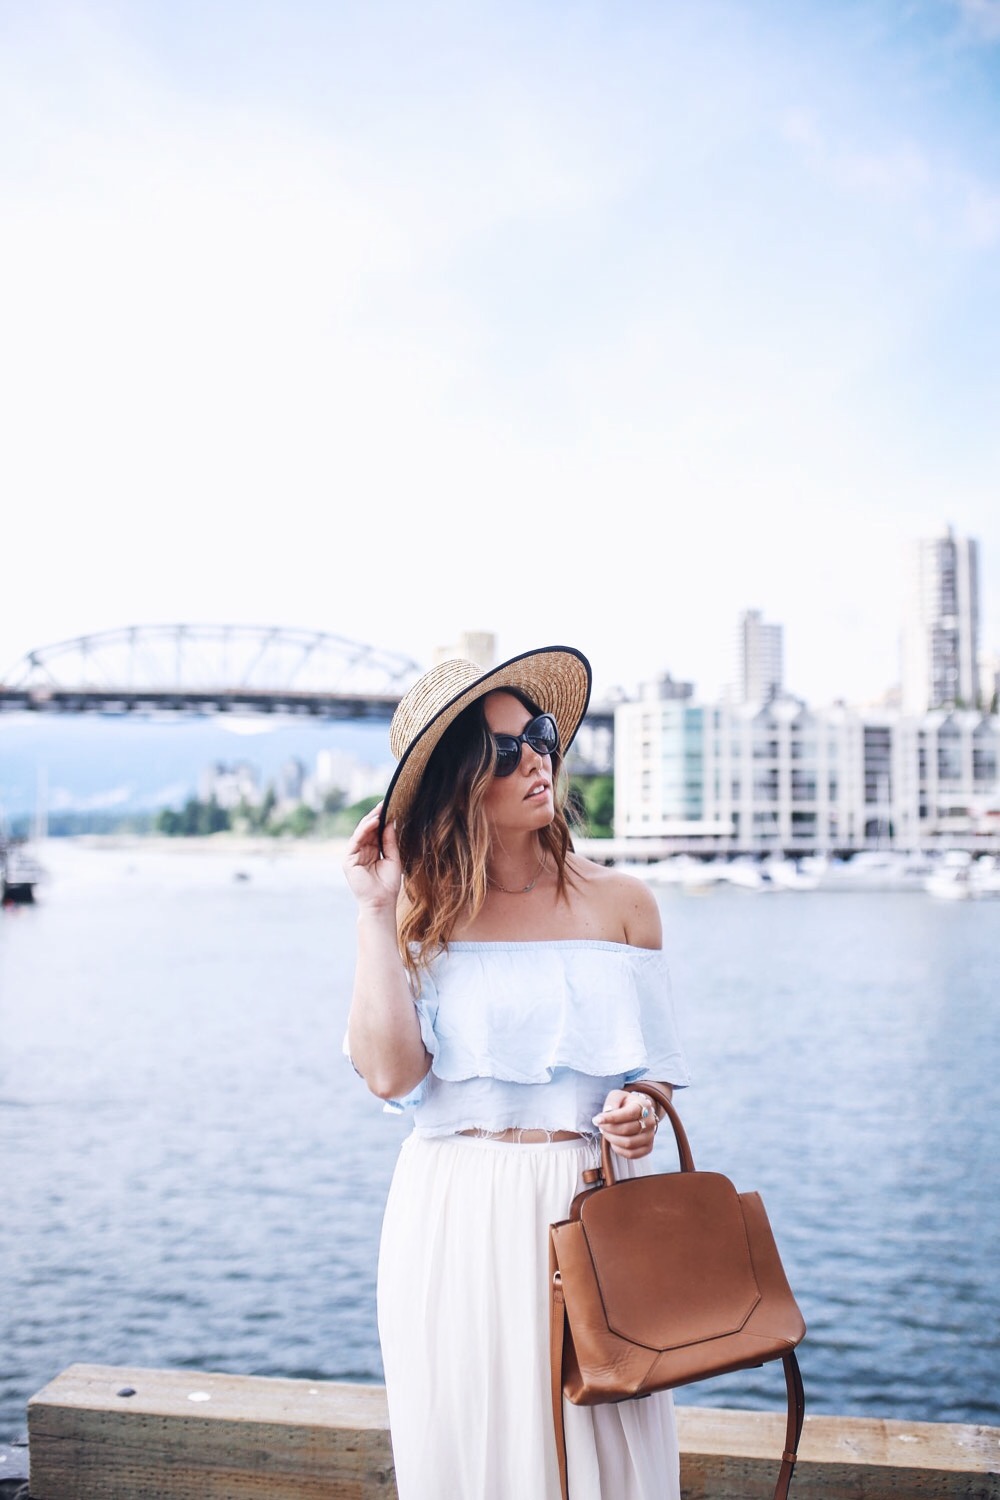 Summer outfit ideas in aritzia by To Vogue or Bust